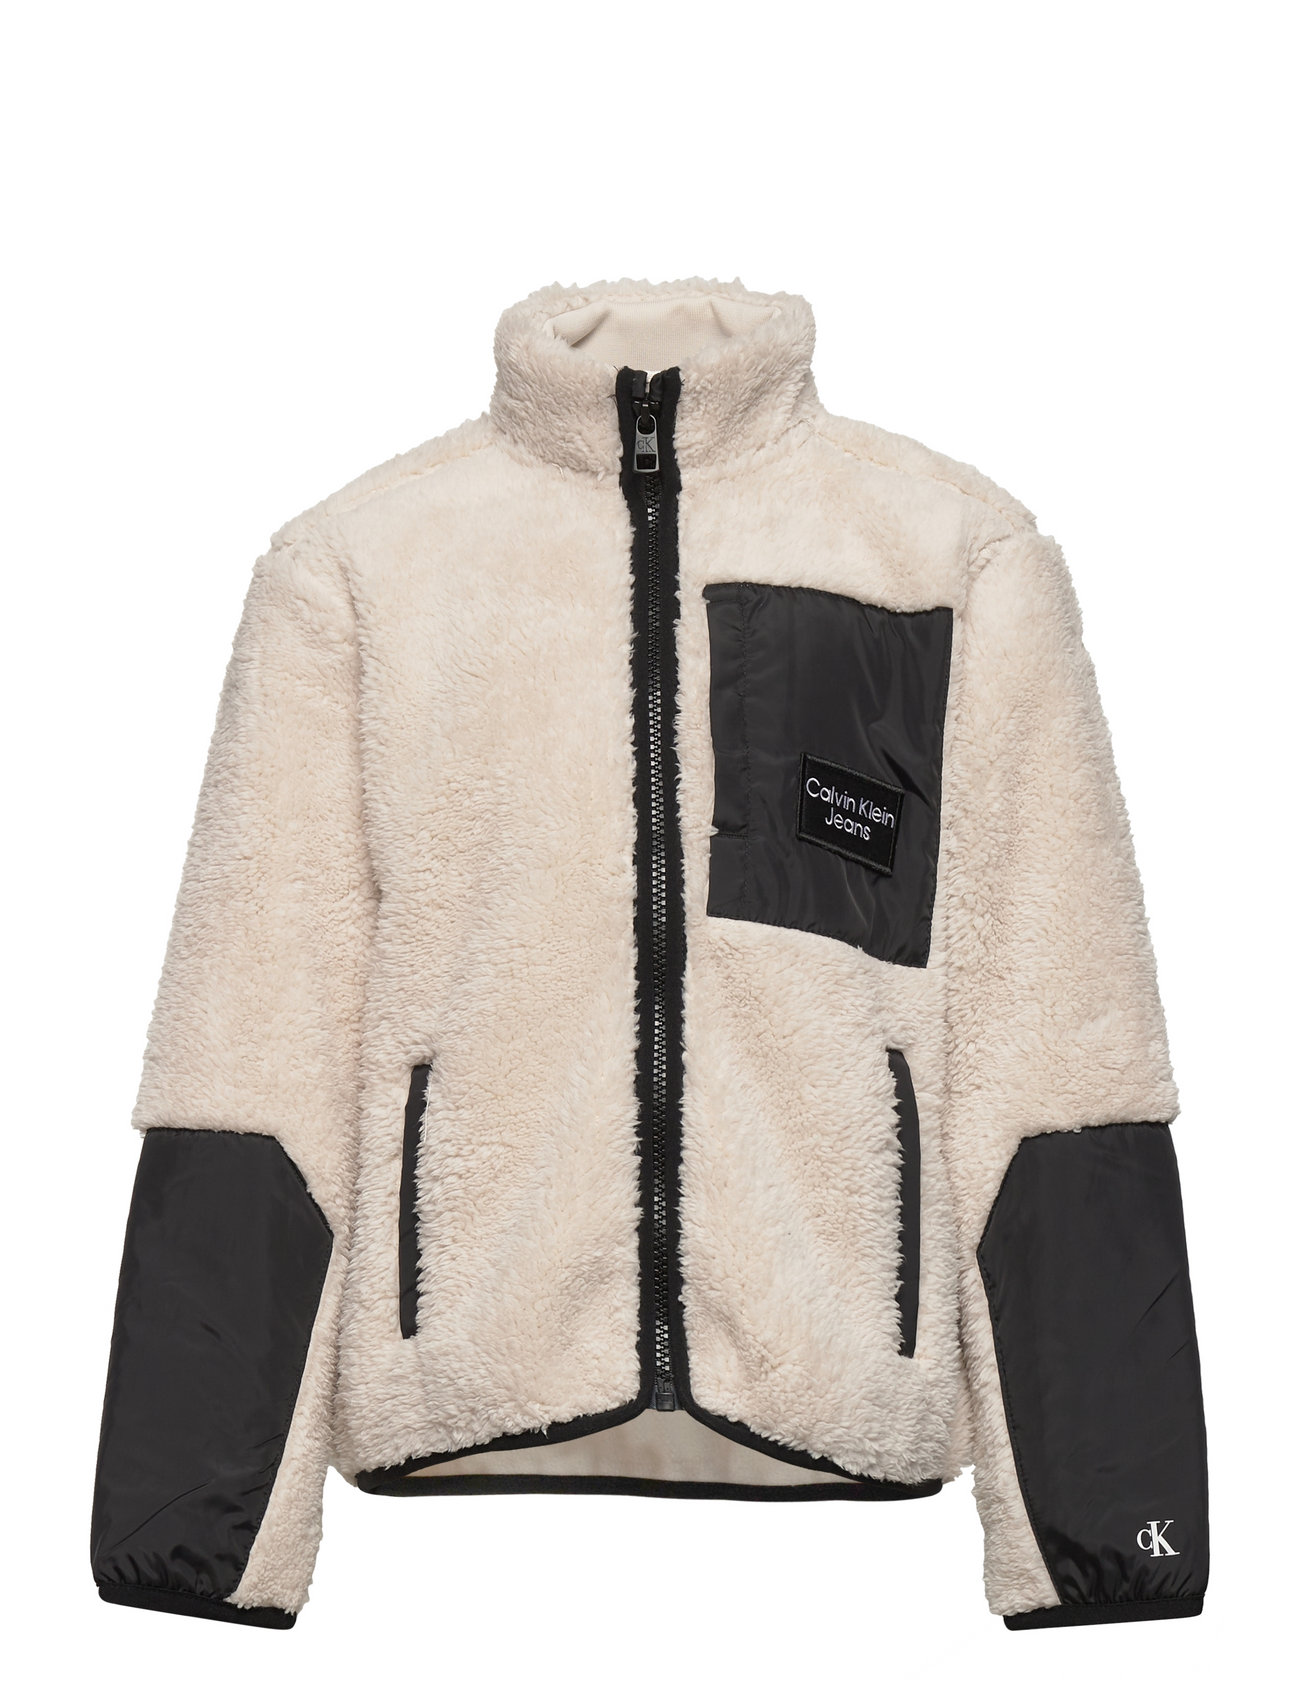 Calvin Klein Sherpa Mix Media Zip Through  €. Buy Jackets from Calvin  Klein online at . Fast delivery and easy returns